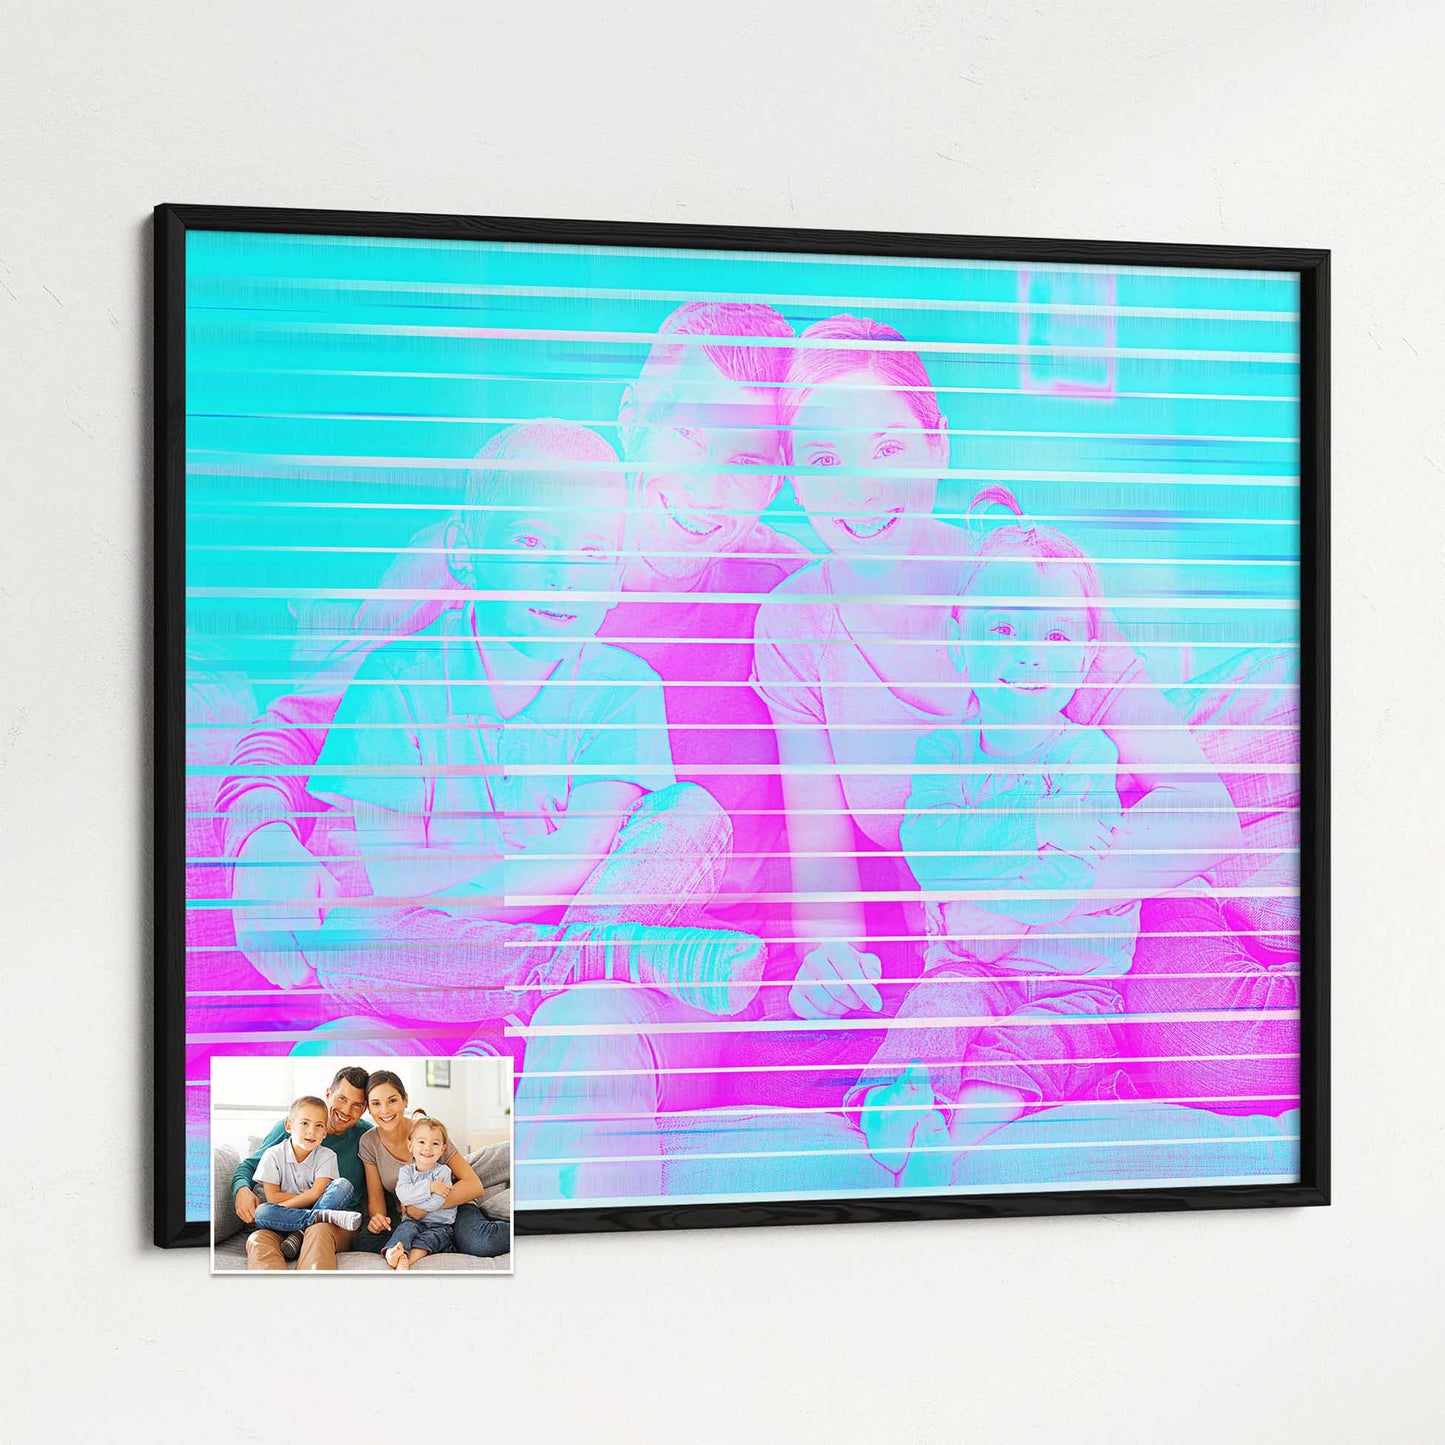 Transform your space with our Personalised Purple & Blue Framed Print. Its vibrant and vivid colors create a visually striking image that sparks creativity and adds a sense of fun and excitement. Crafted with gallery-quality paper